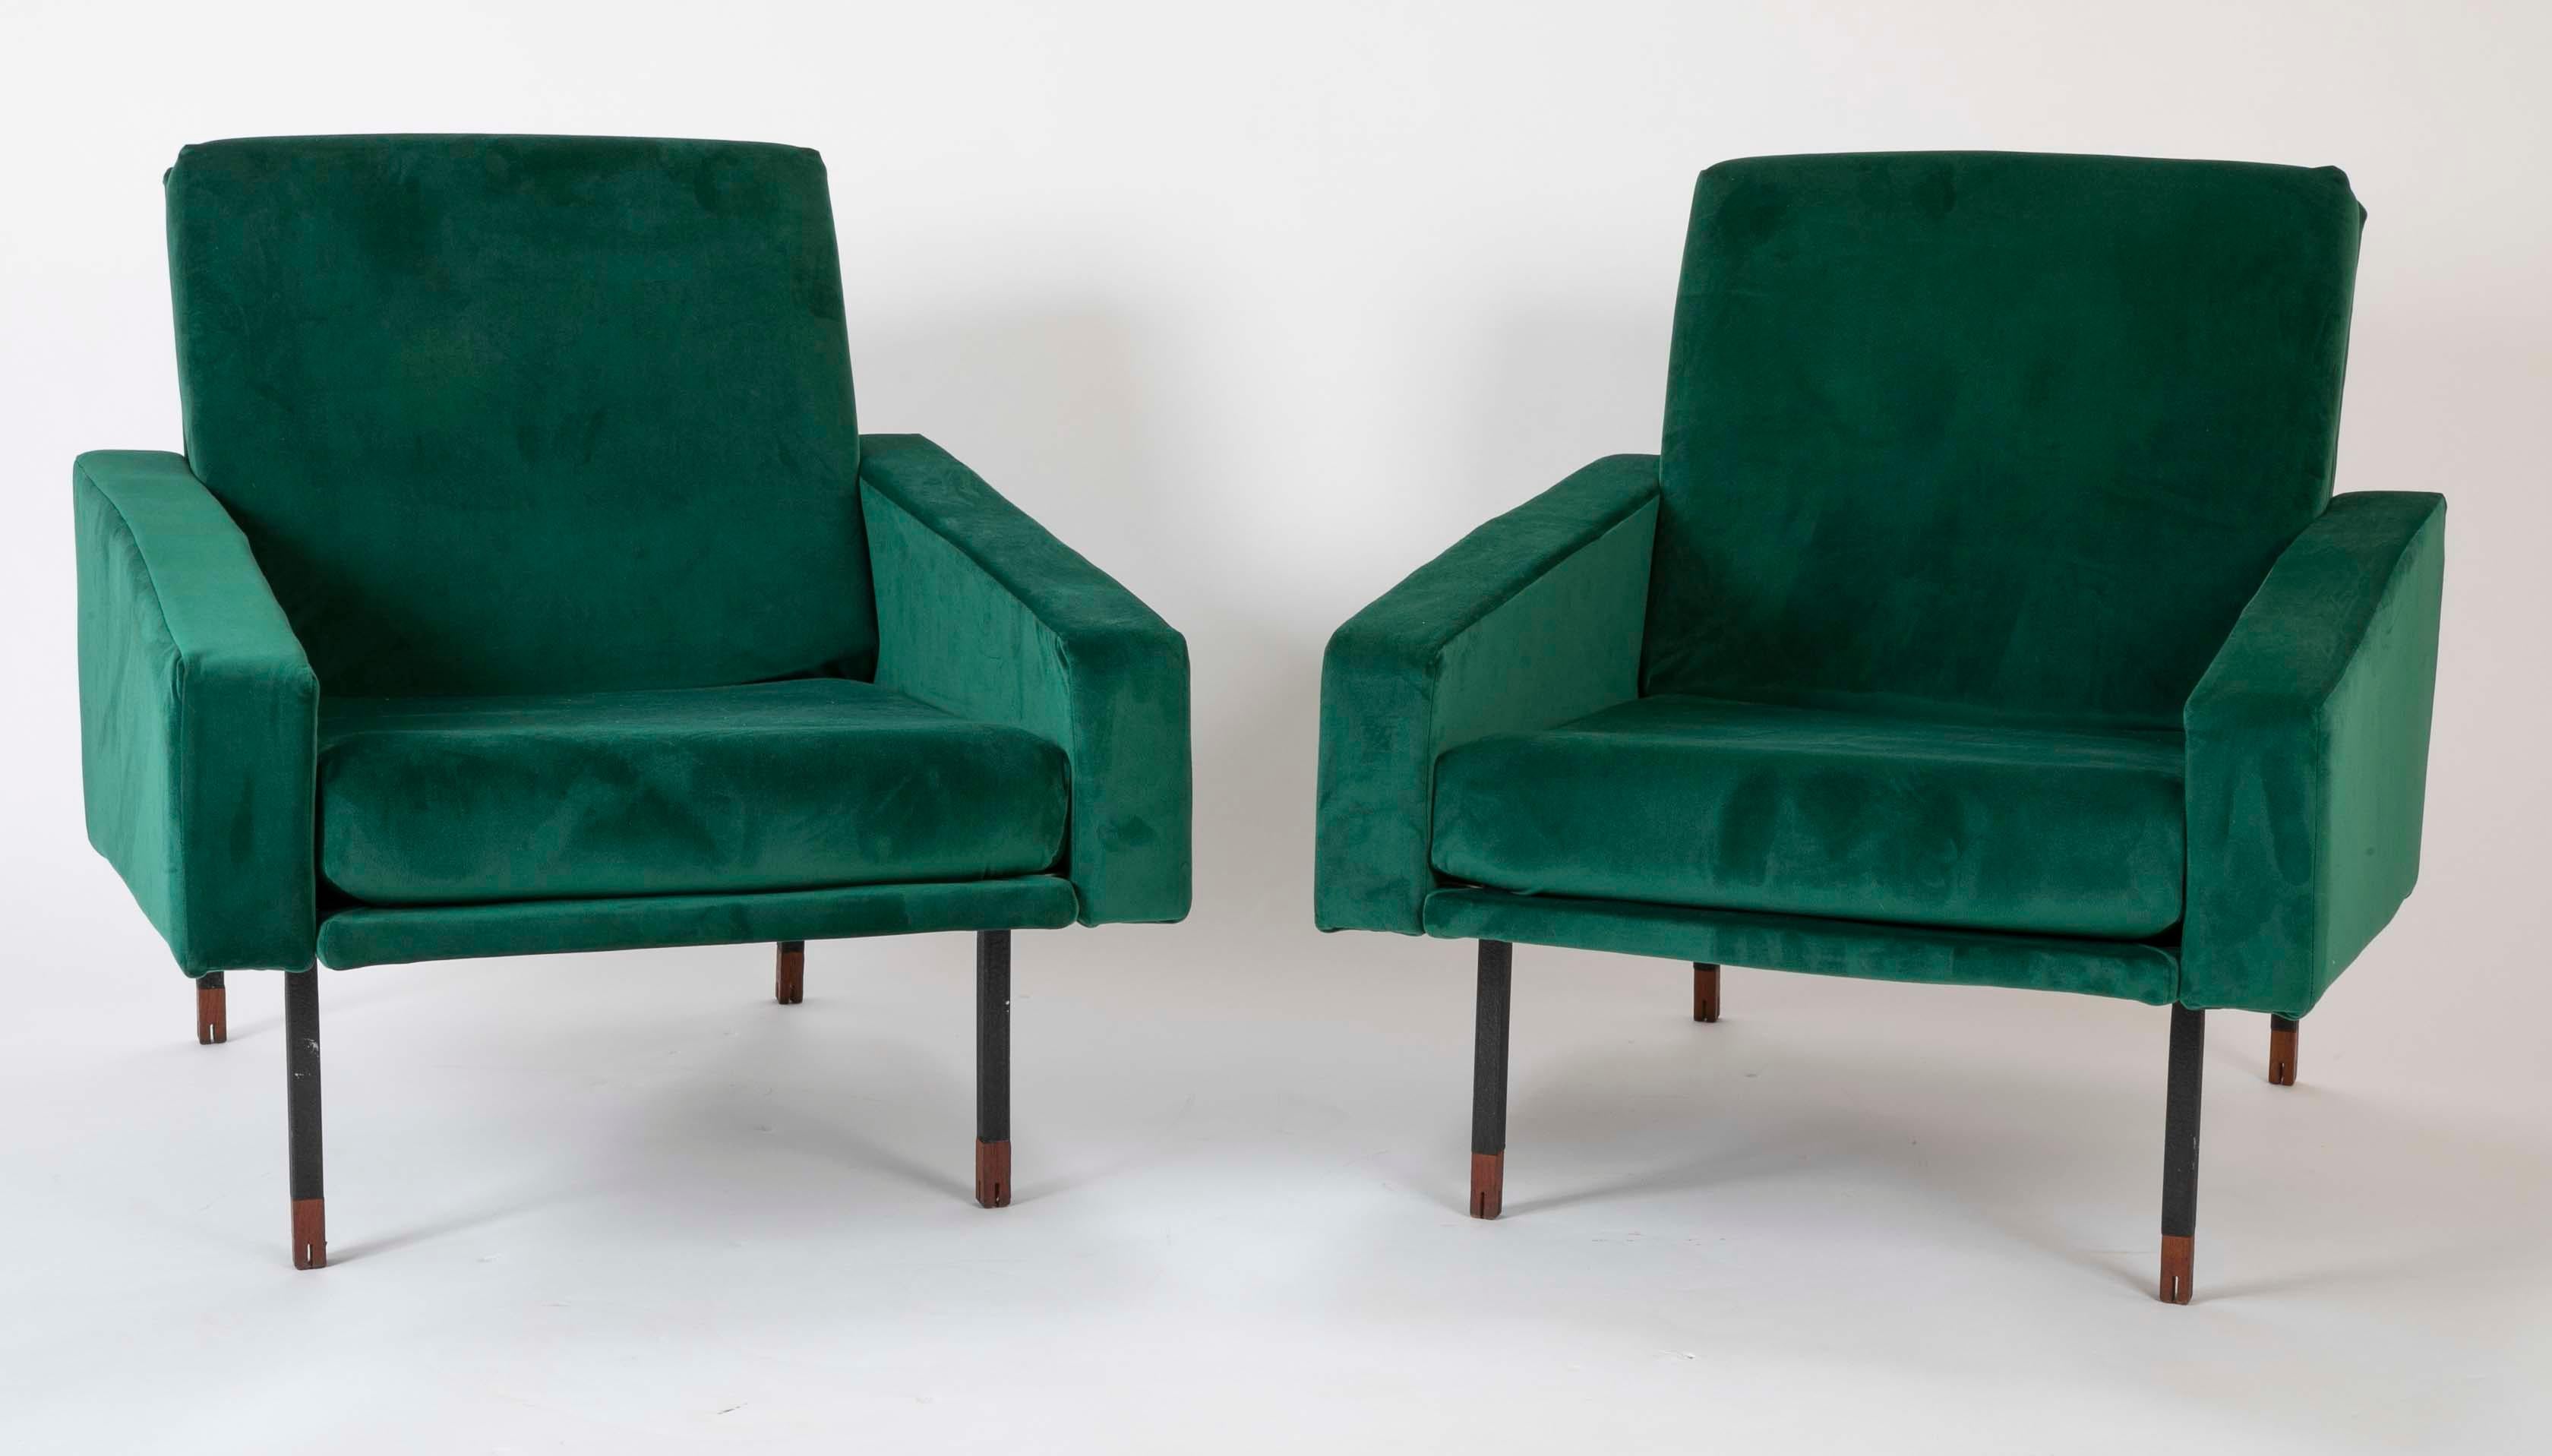 A pair of Italian Mid-Century armchairs in emerald green ultra-suede. Blackened steel frame tipped with walnut feet.